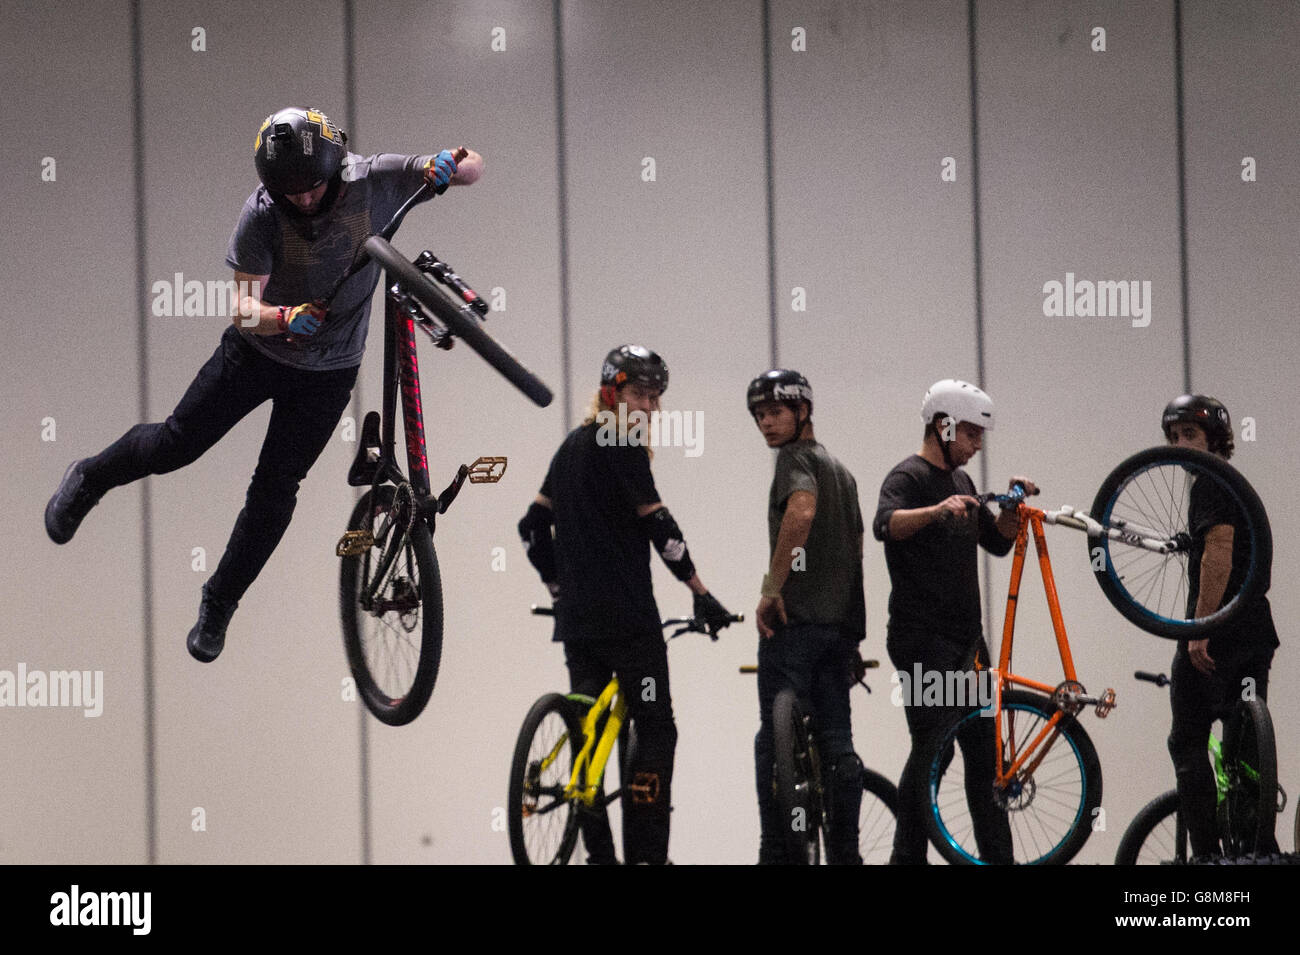 BMX riders perform stunts at the London Bike Show at the Excel centre in east London. Stock Photo